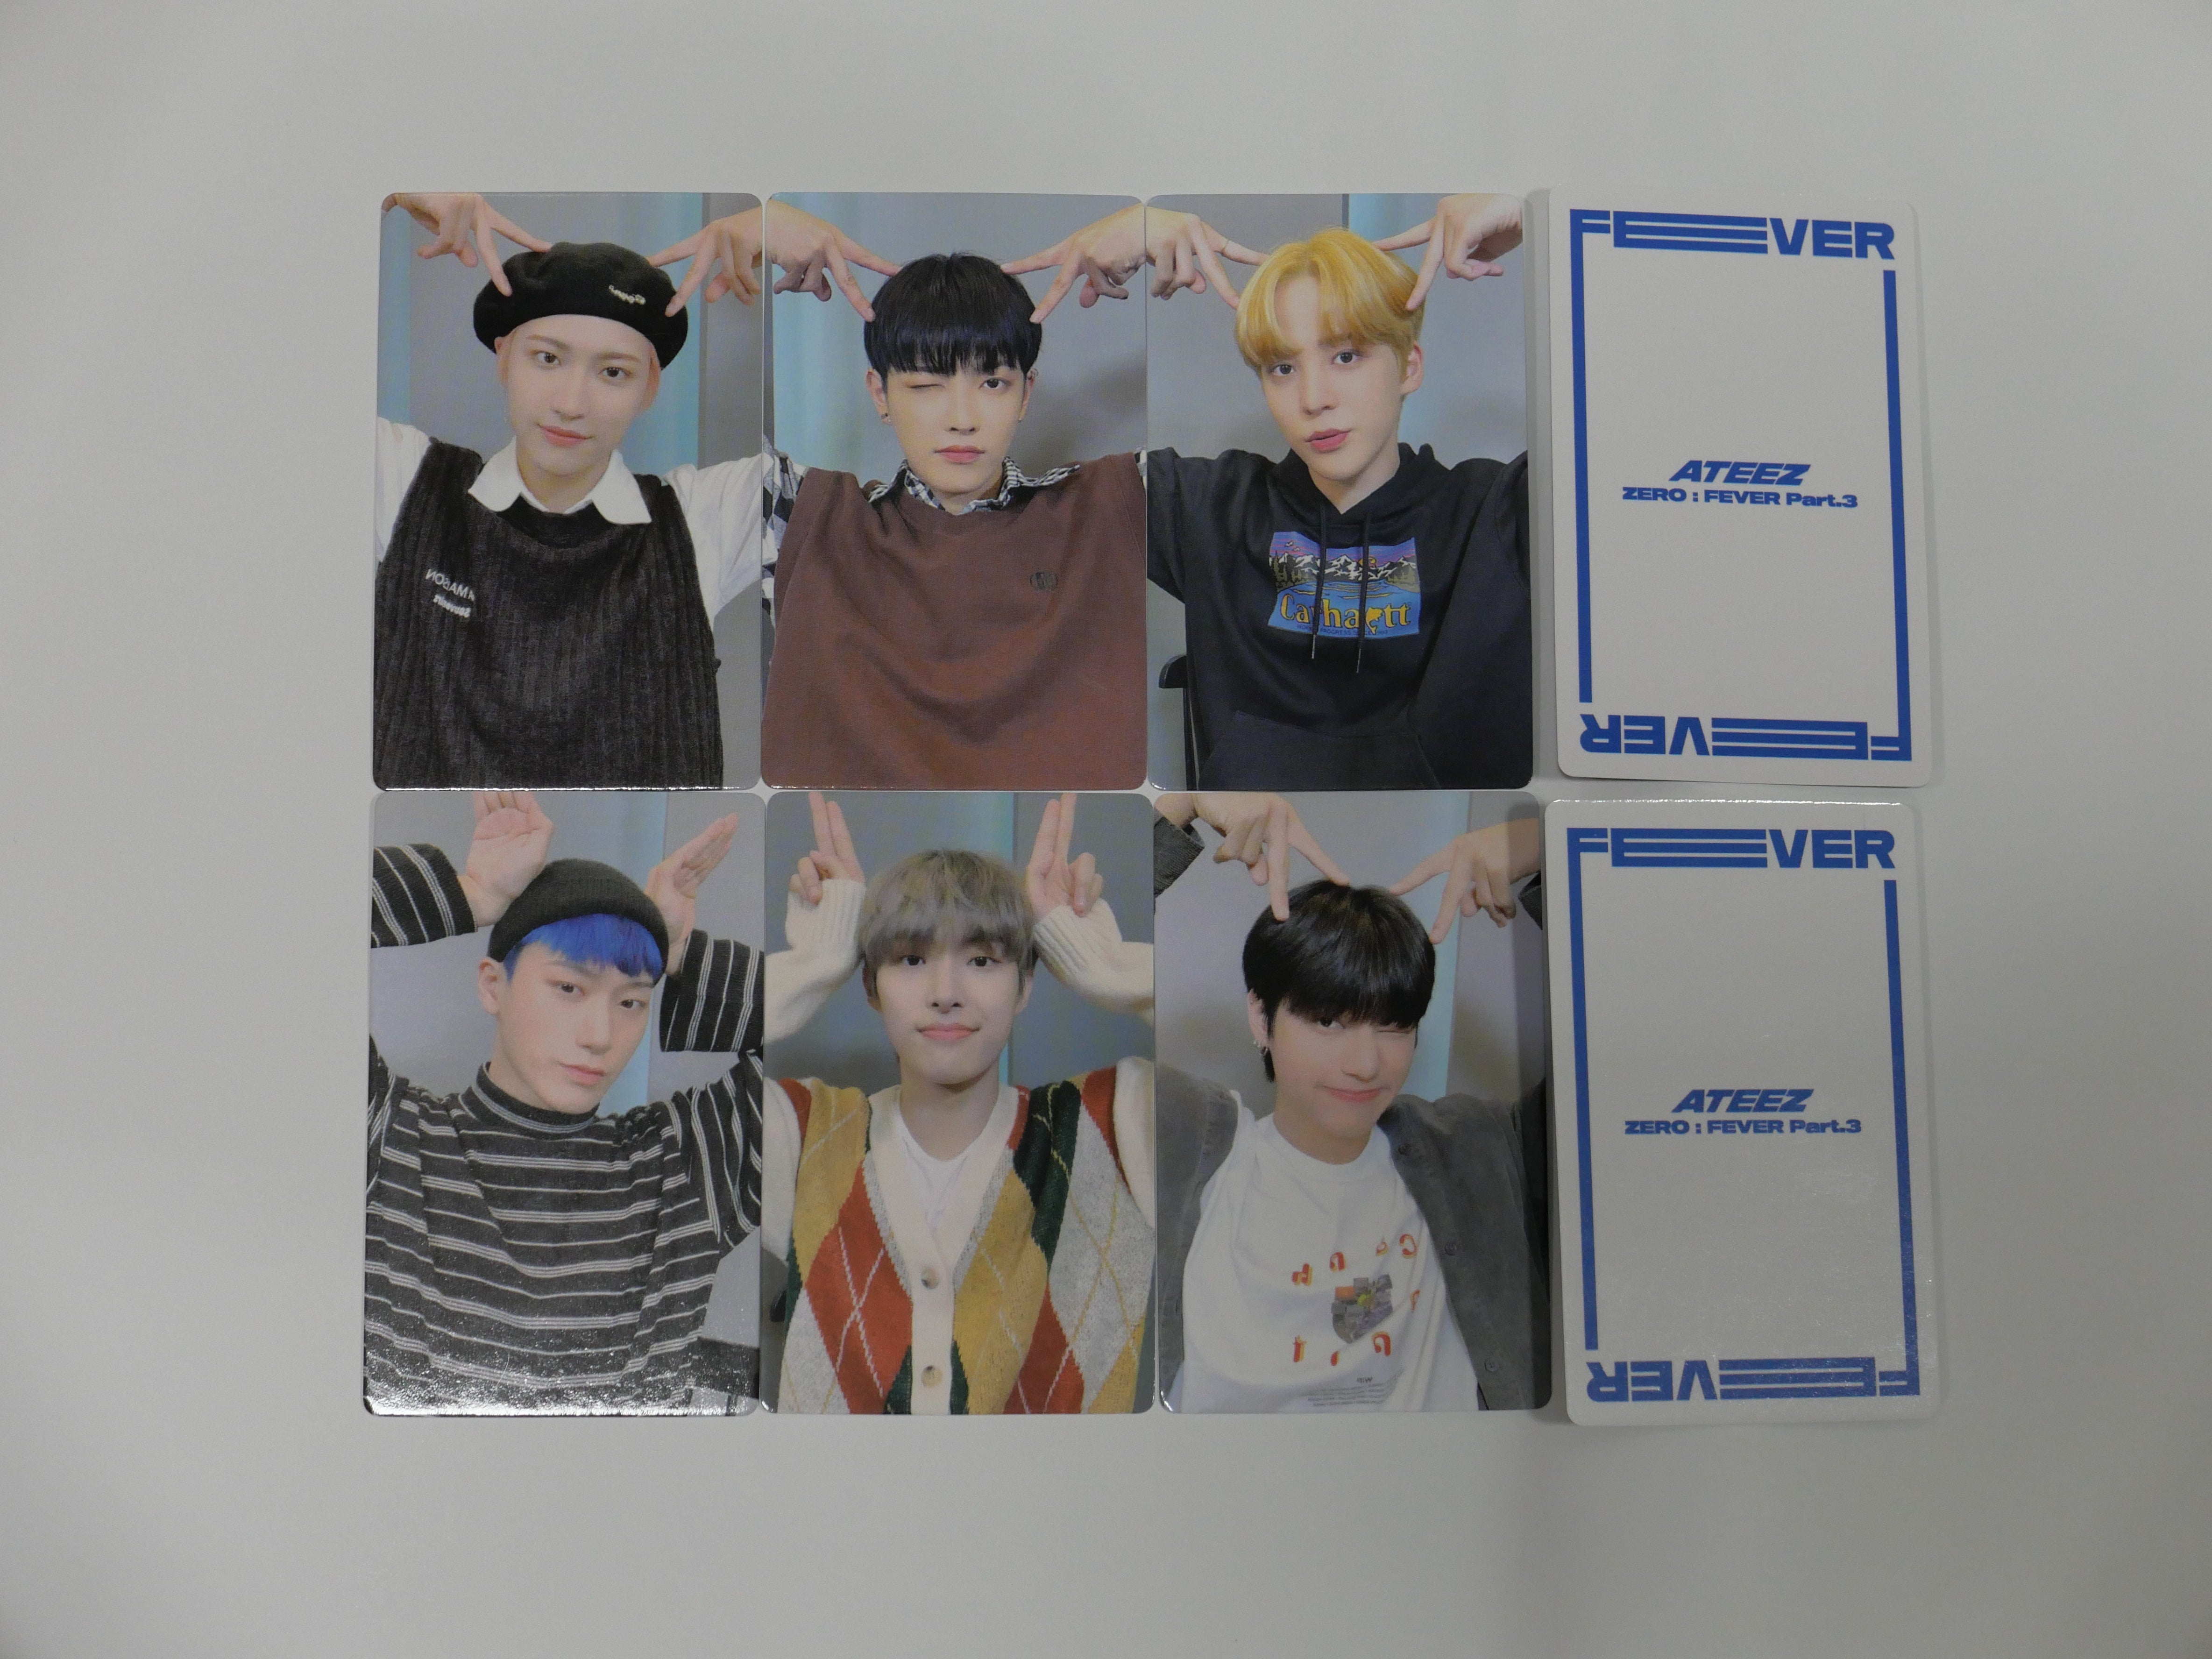 Ateez 'Zero Fever Part 3' - Apple Music Fansign Event Photocard 